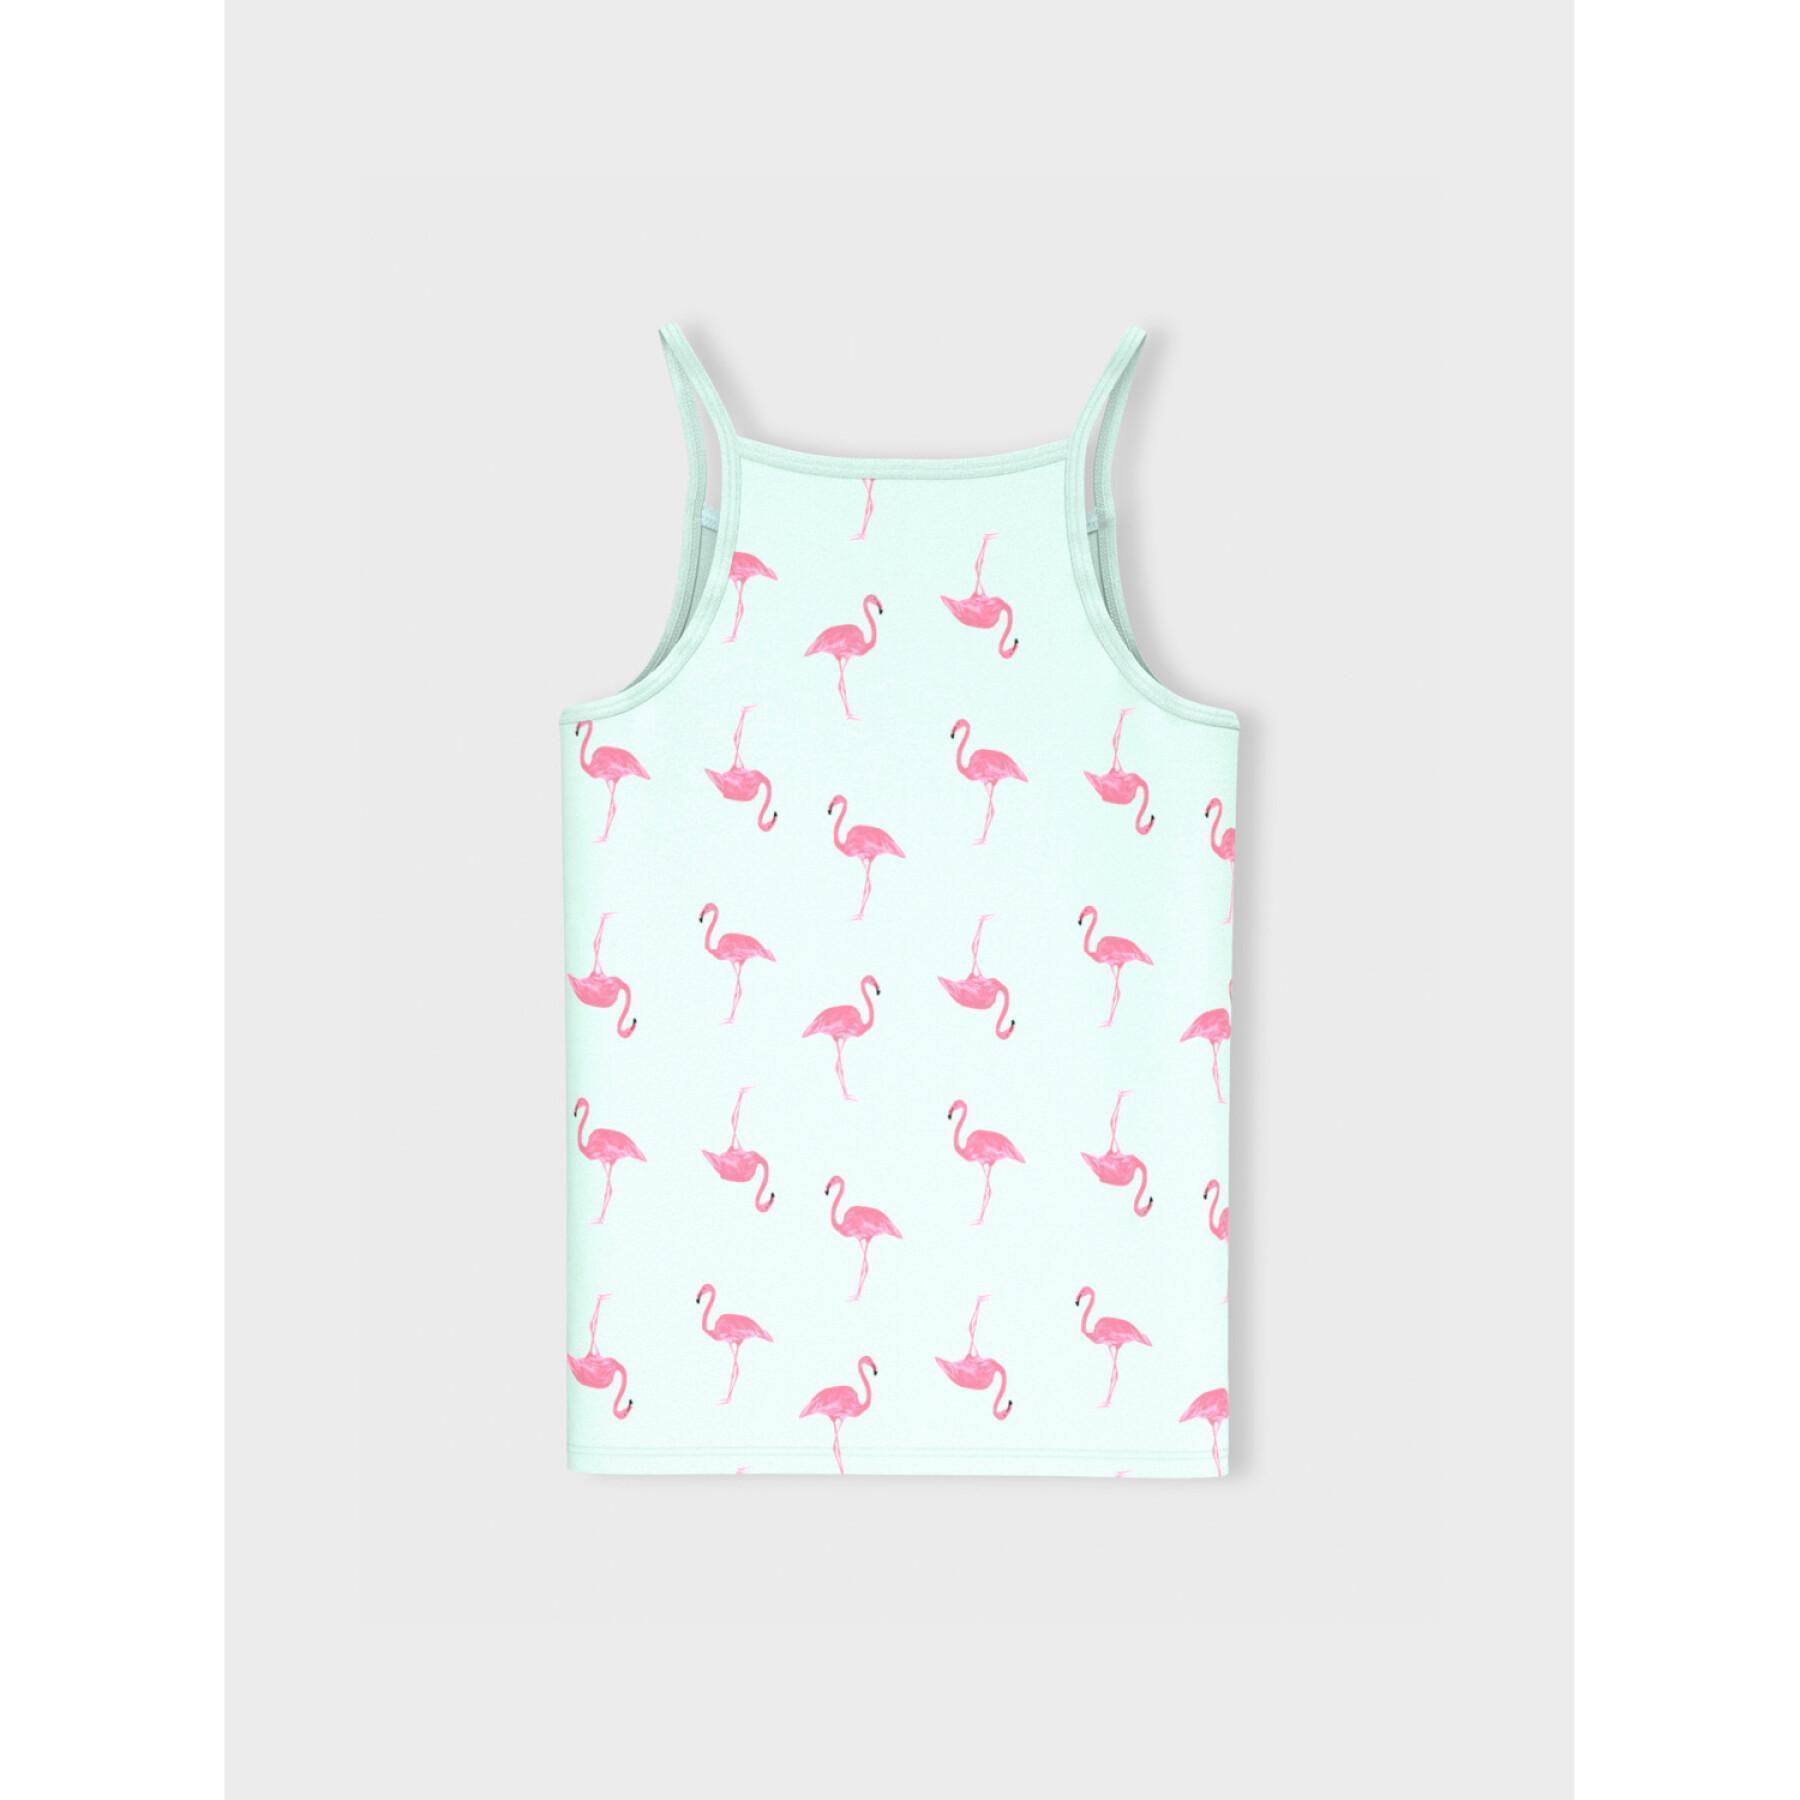 Pack of 2 tank tops for girls Name it Strap